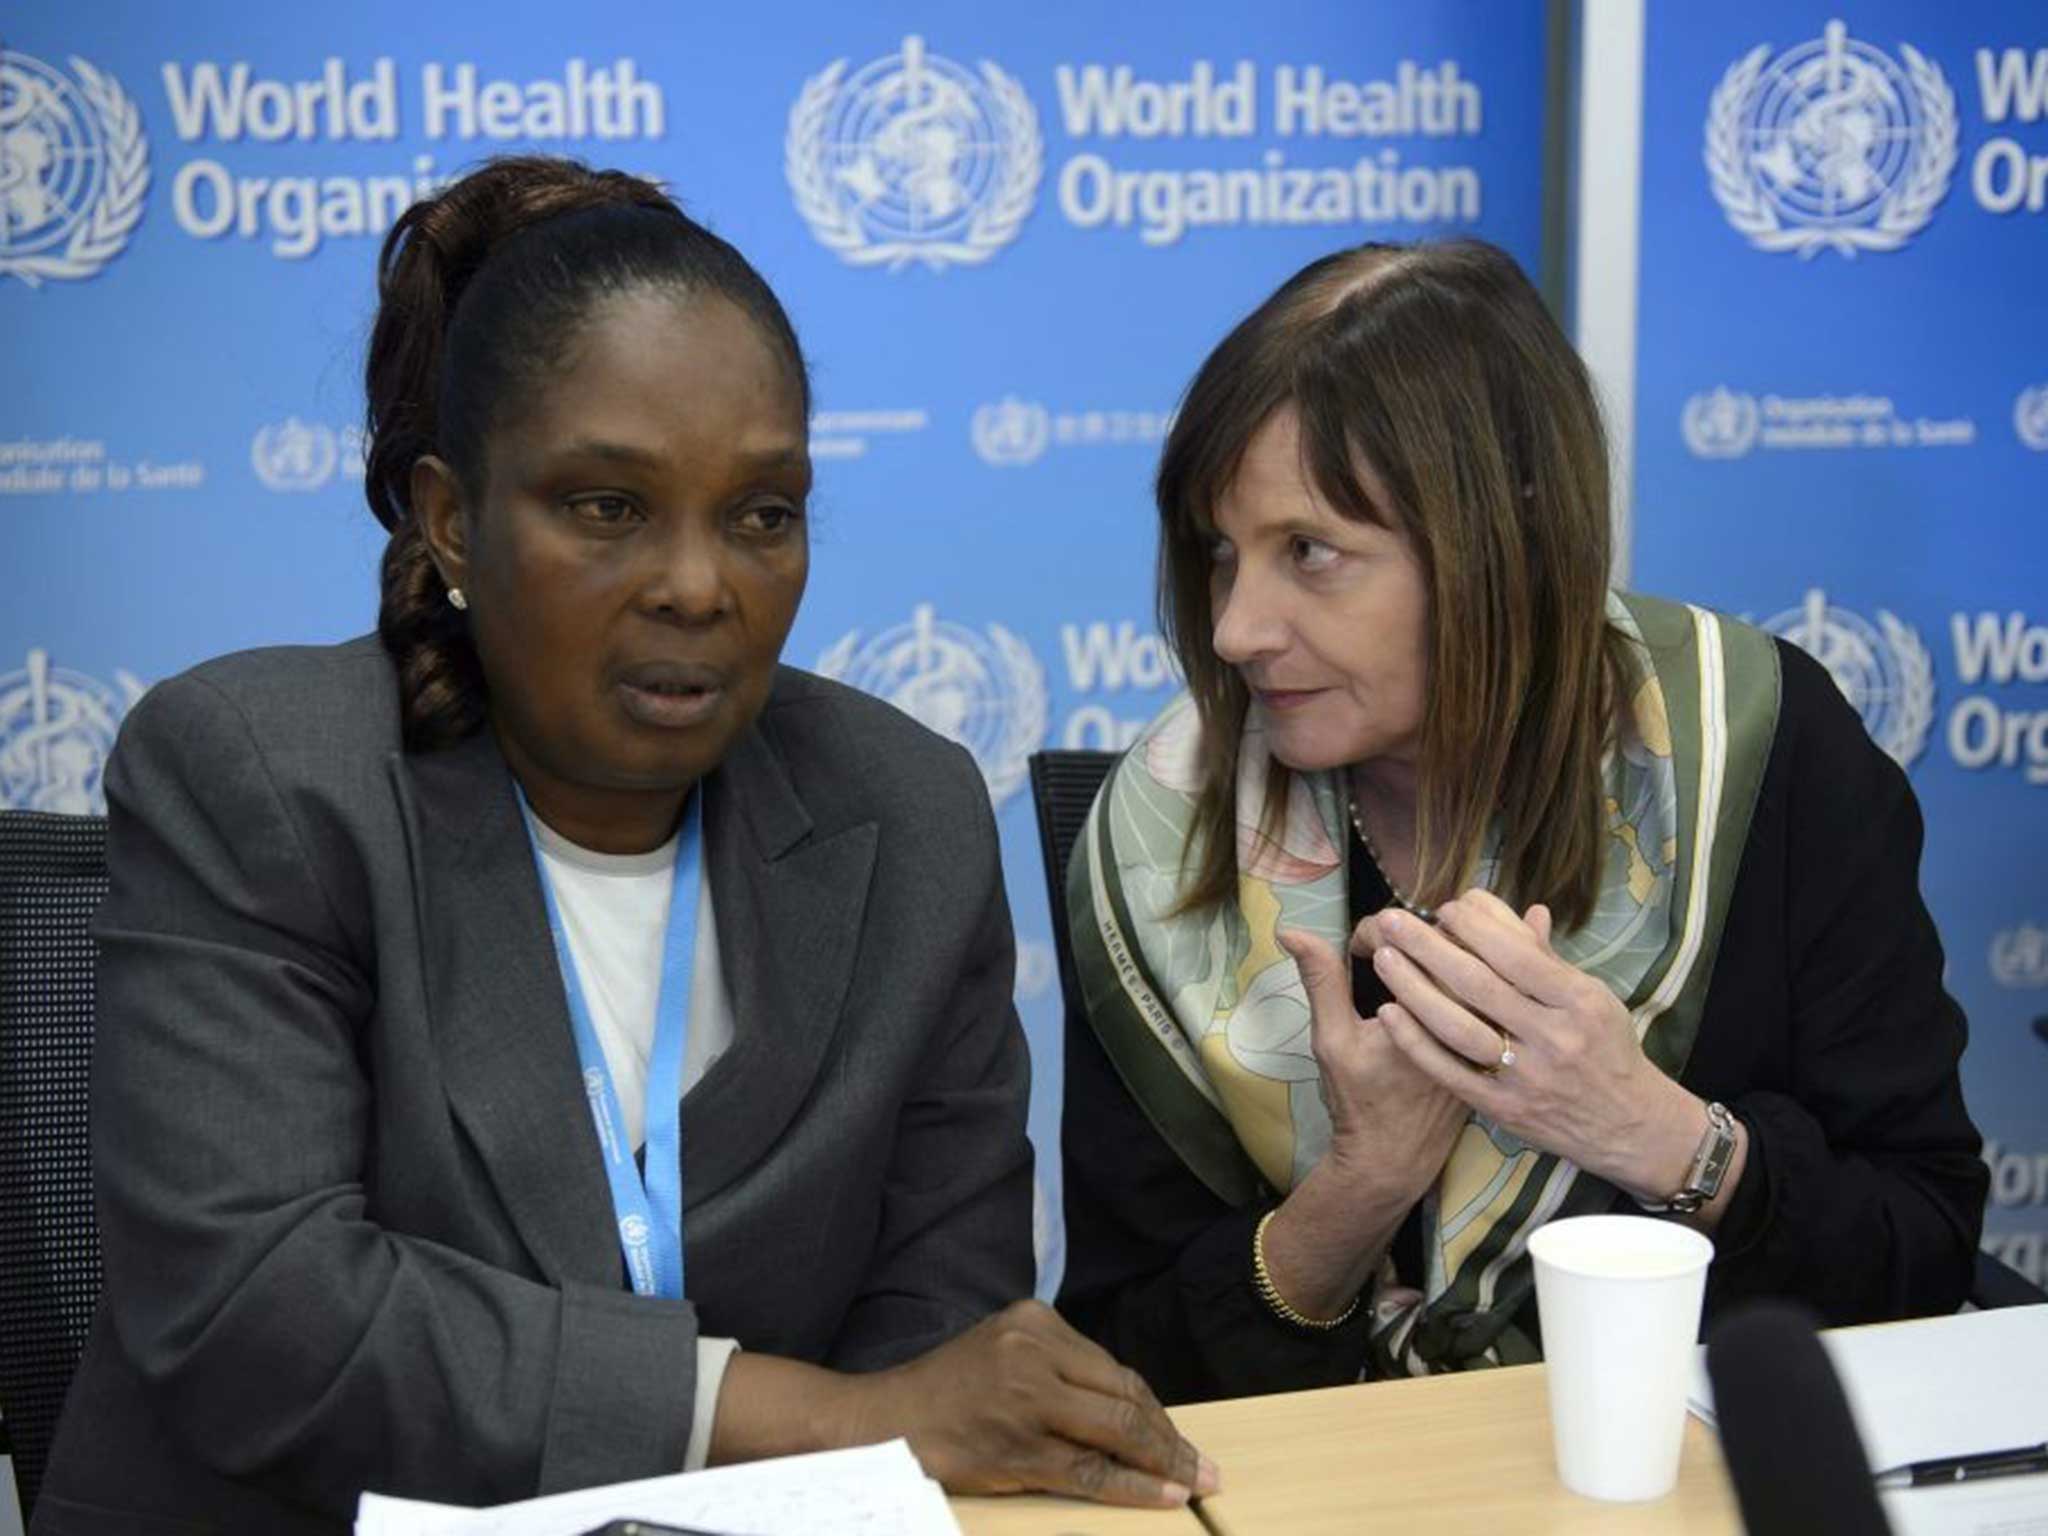 Liberia's Chief Medical Officer Bernice Dahn (L) and WHO Assistant Director General Marie-Paule Kieny (R) speak during a press conference